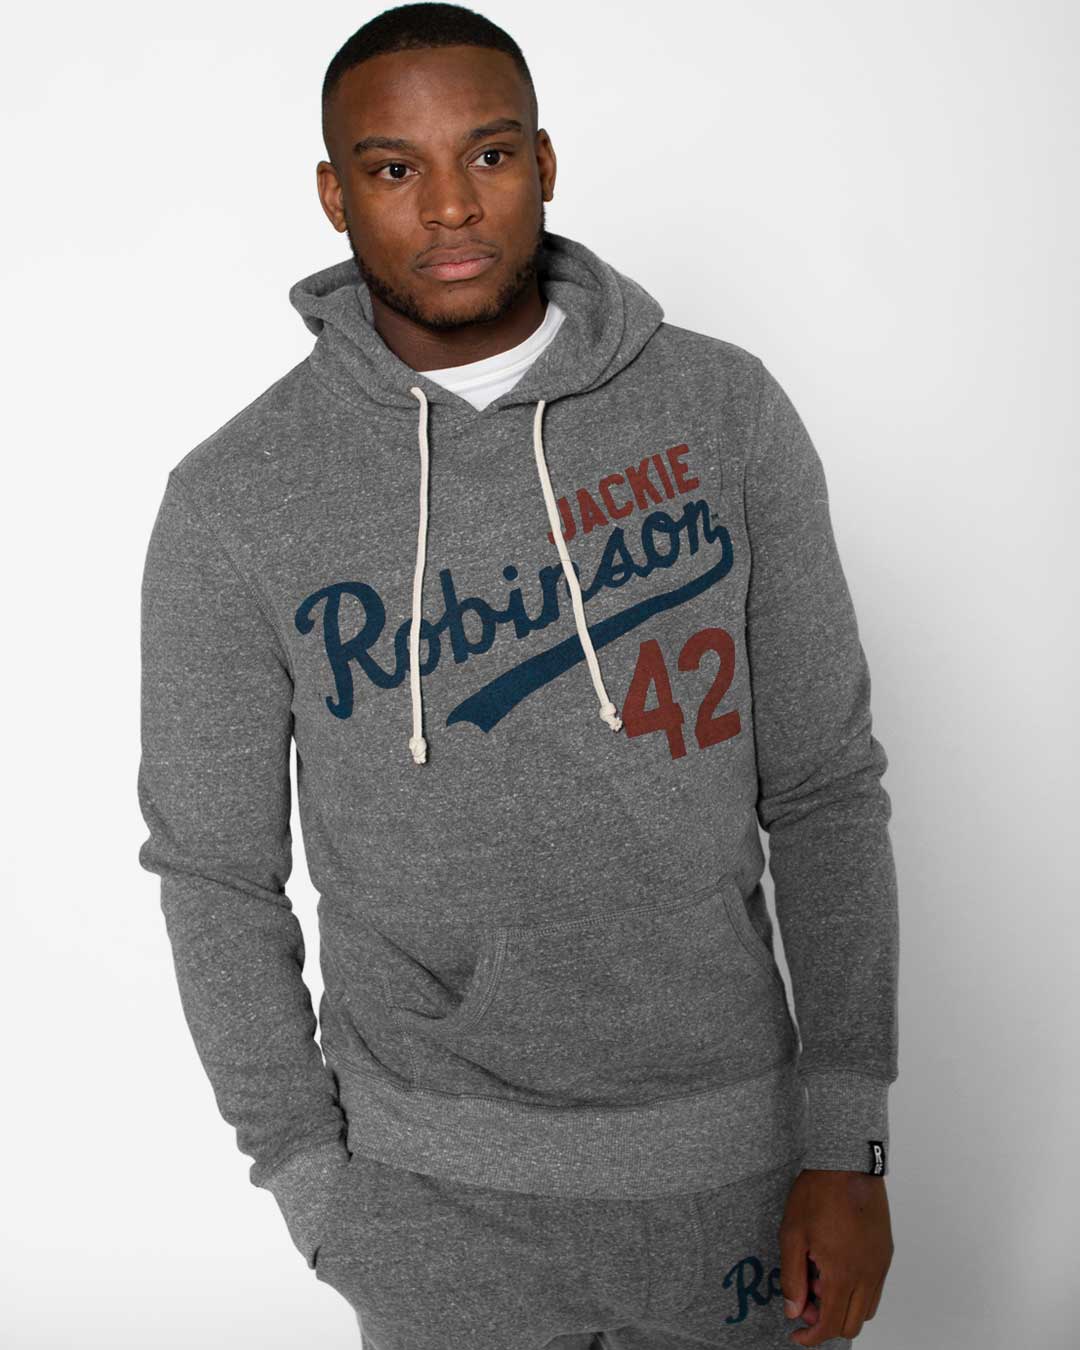 Jackie Robinson #42 Classic Grey PO Hoody - Roots of Fight Canada